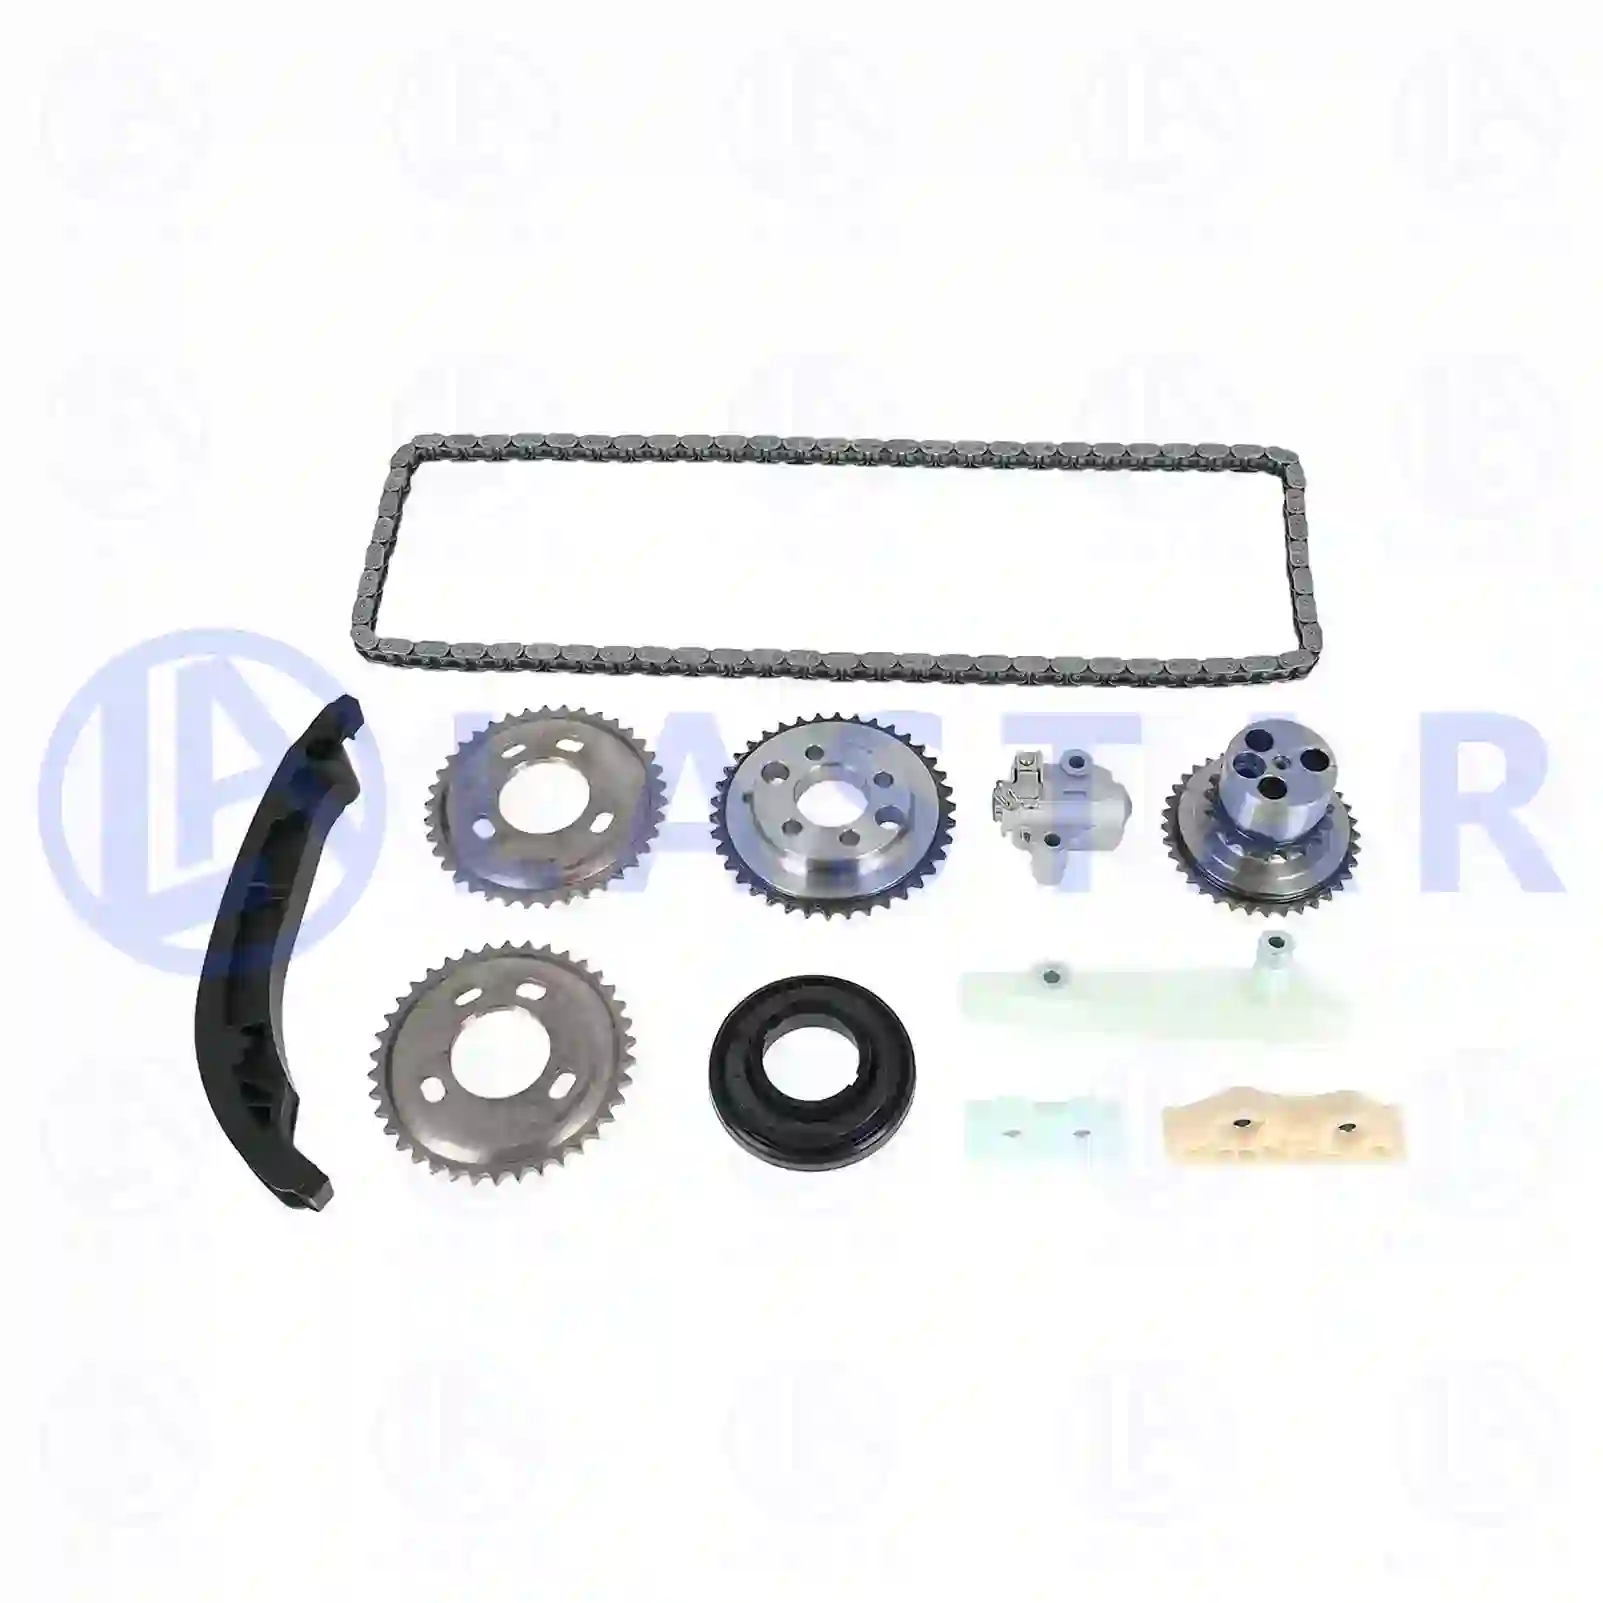 Timing chain kit, 77701089, 1372841S1, 1704089S1 ||  77701089 Lastar Spare Part | Truck Spare Parts, Auotomotive Spare Parts Timing chain kit, 77701089, 1372841S1, 1704089S1 ||  77701089 Lastar Spare Part | Truck Spare Parts, Auotomotive Spare Parts